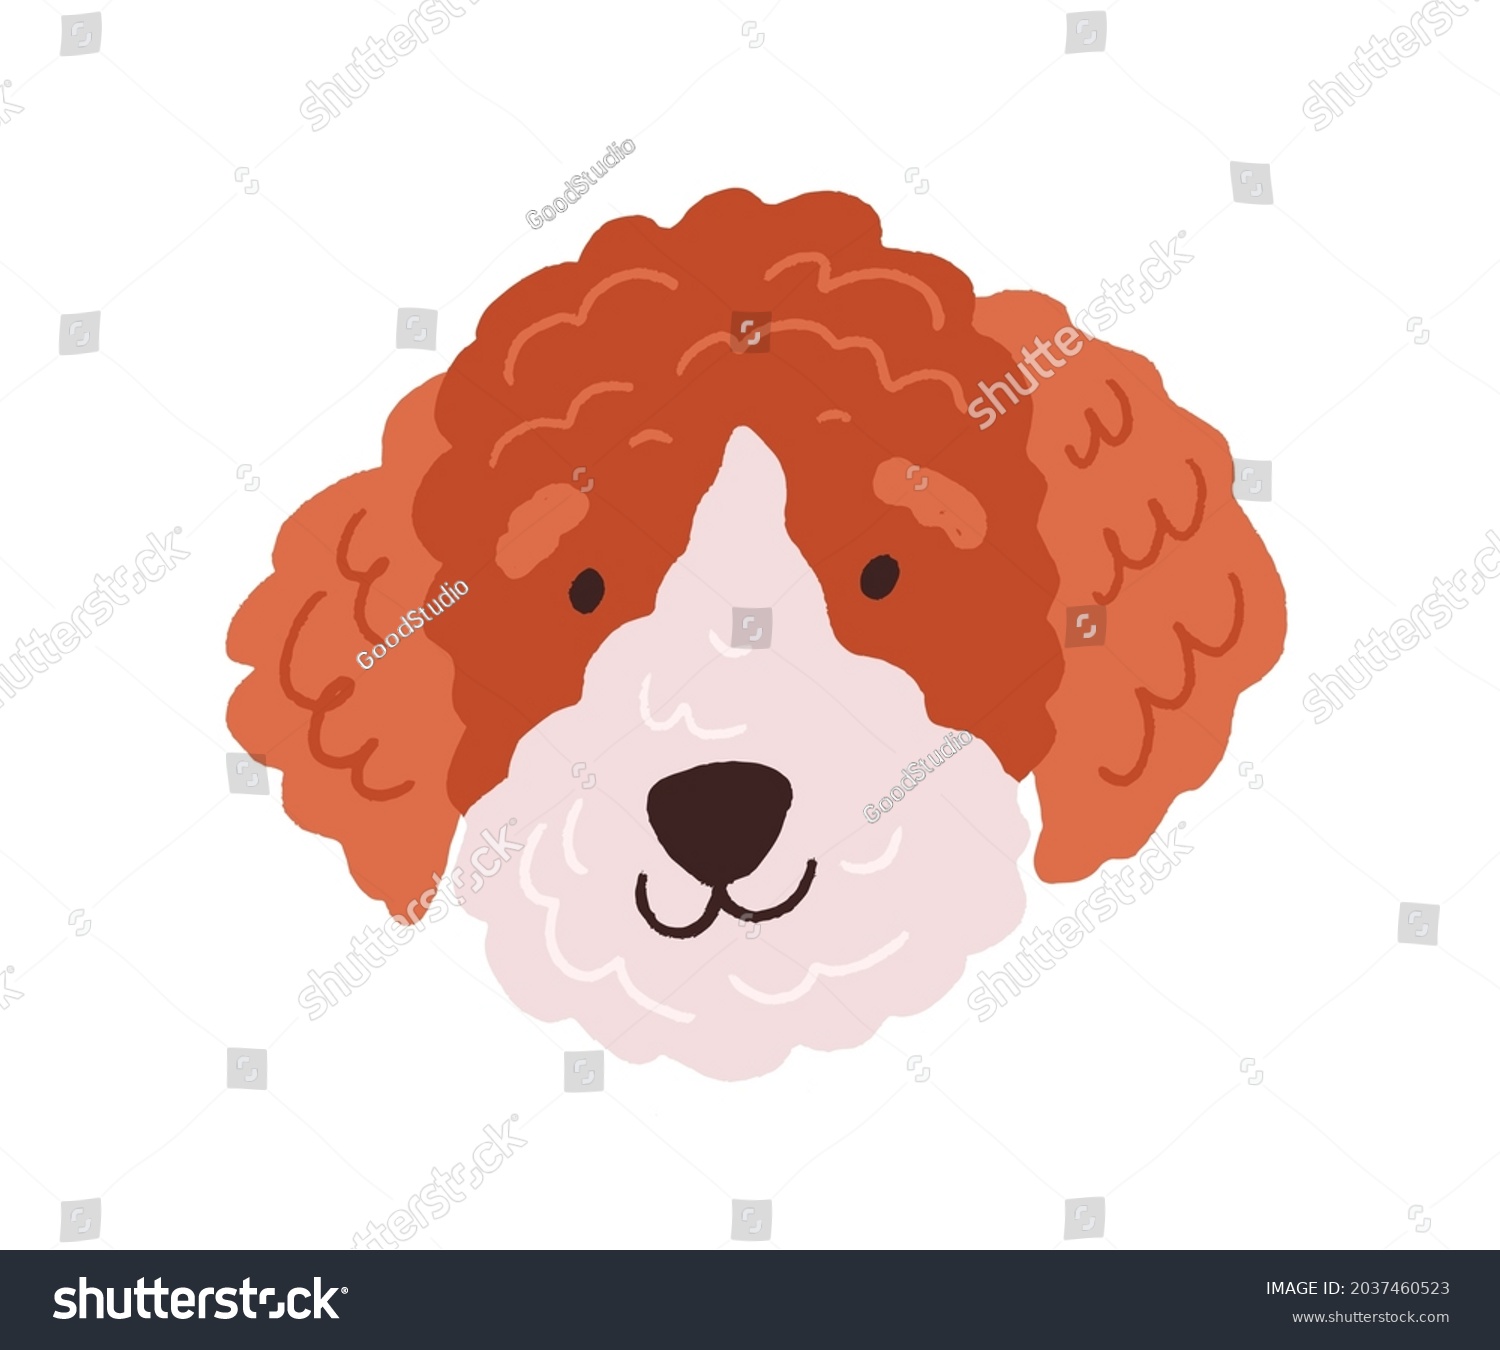 SVG of Cute dog's face. Funny head of puppy with curly fluffy hair. Canine animal's muzzle. Adorable doggy portrait. Amusing labradoodle in doodle style. Flat vector illustration isolated on white background svg